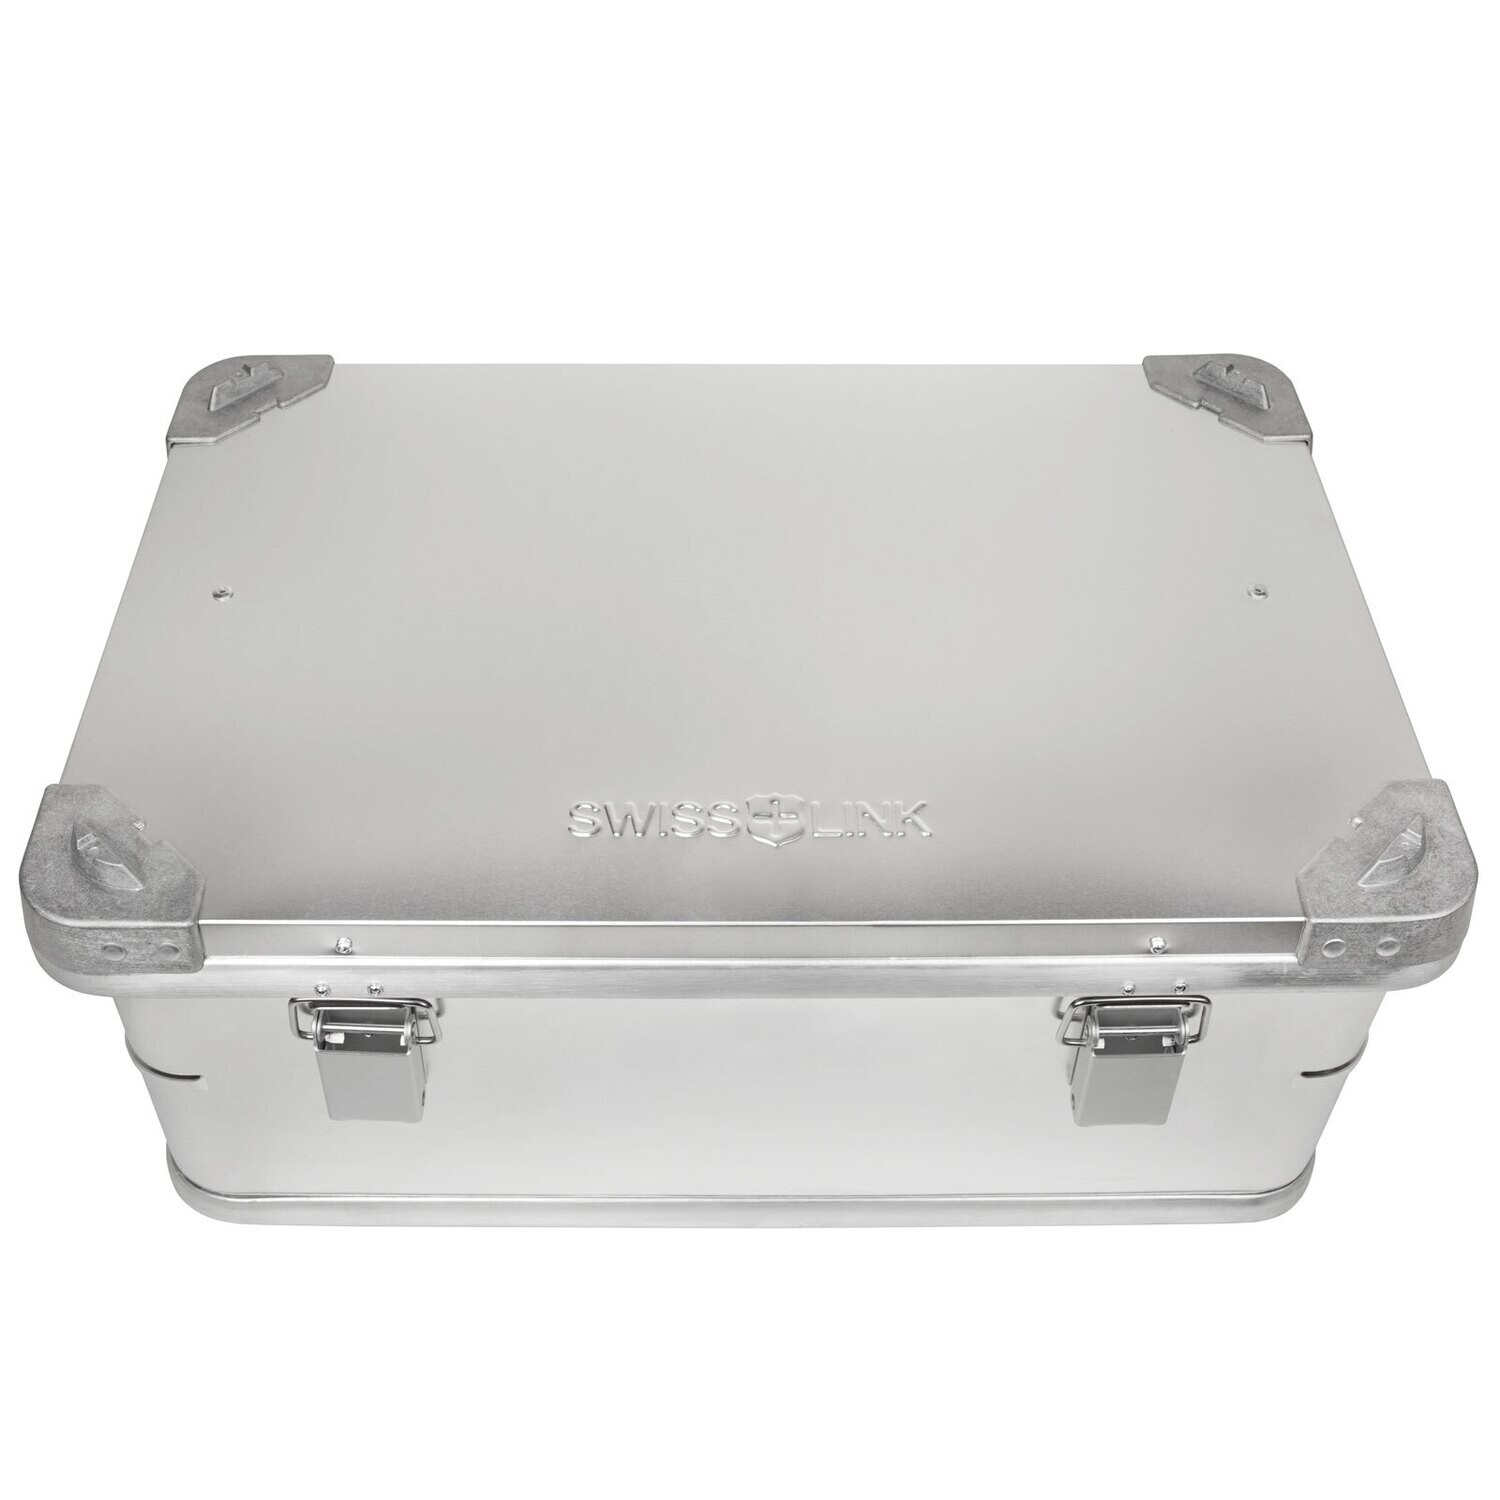 Aluminum Storage Boxes by Swiss Link